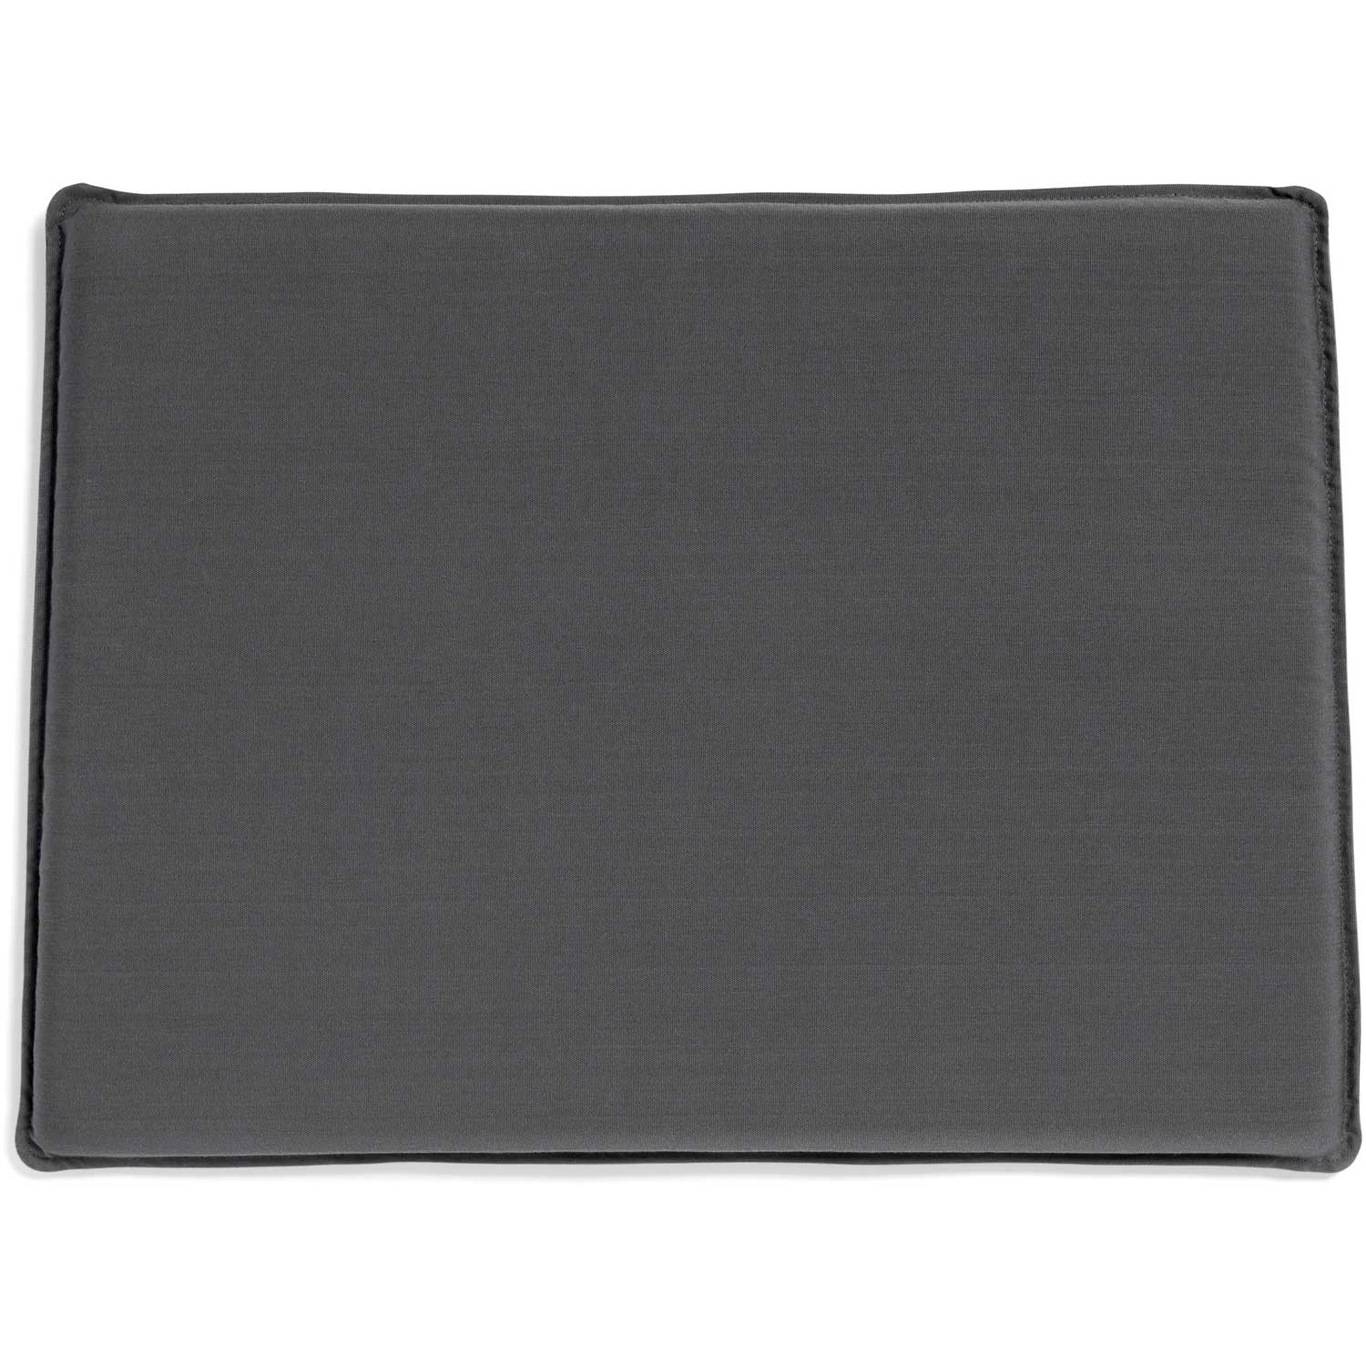 Hee Seat Cushion For Lounge Chair, Anthracite